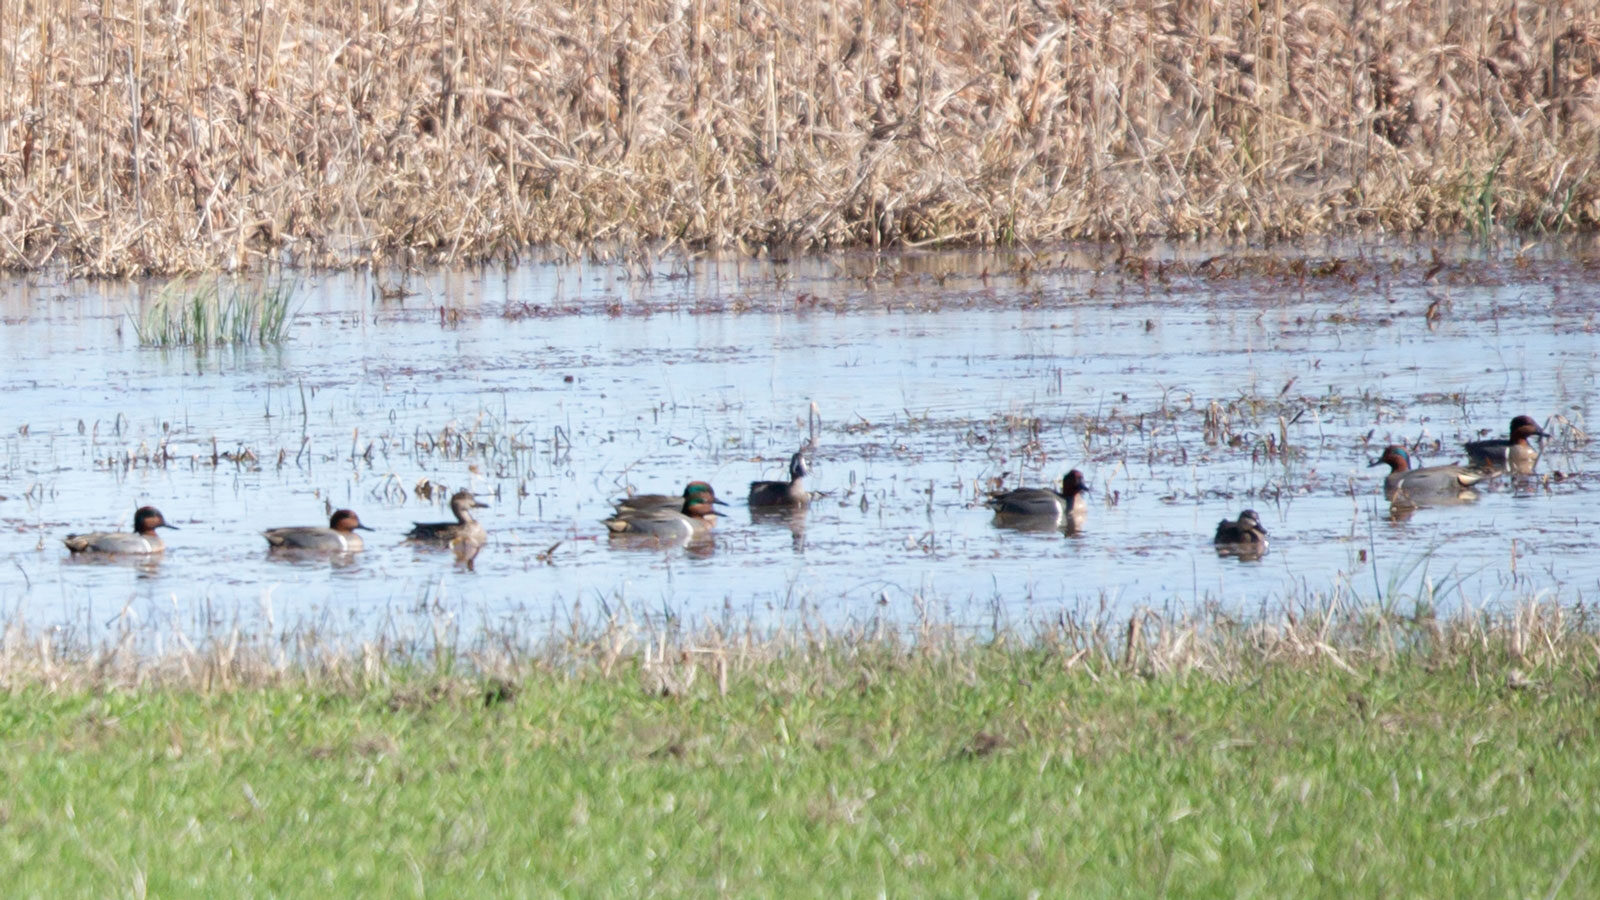 Flock of male green-winged teal ducks with a female duck and a blue-winged teal duck swimming